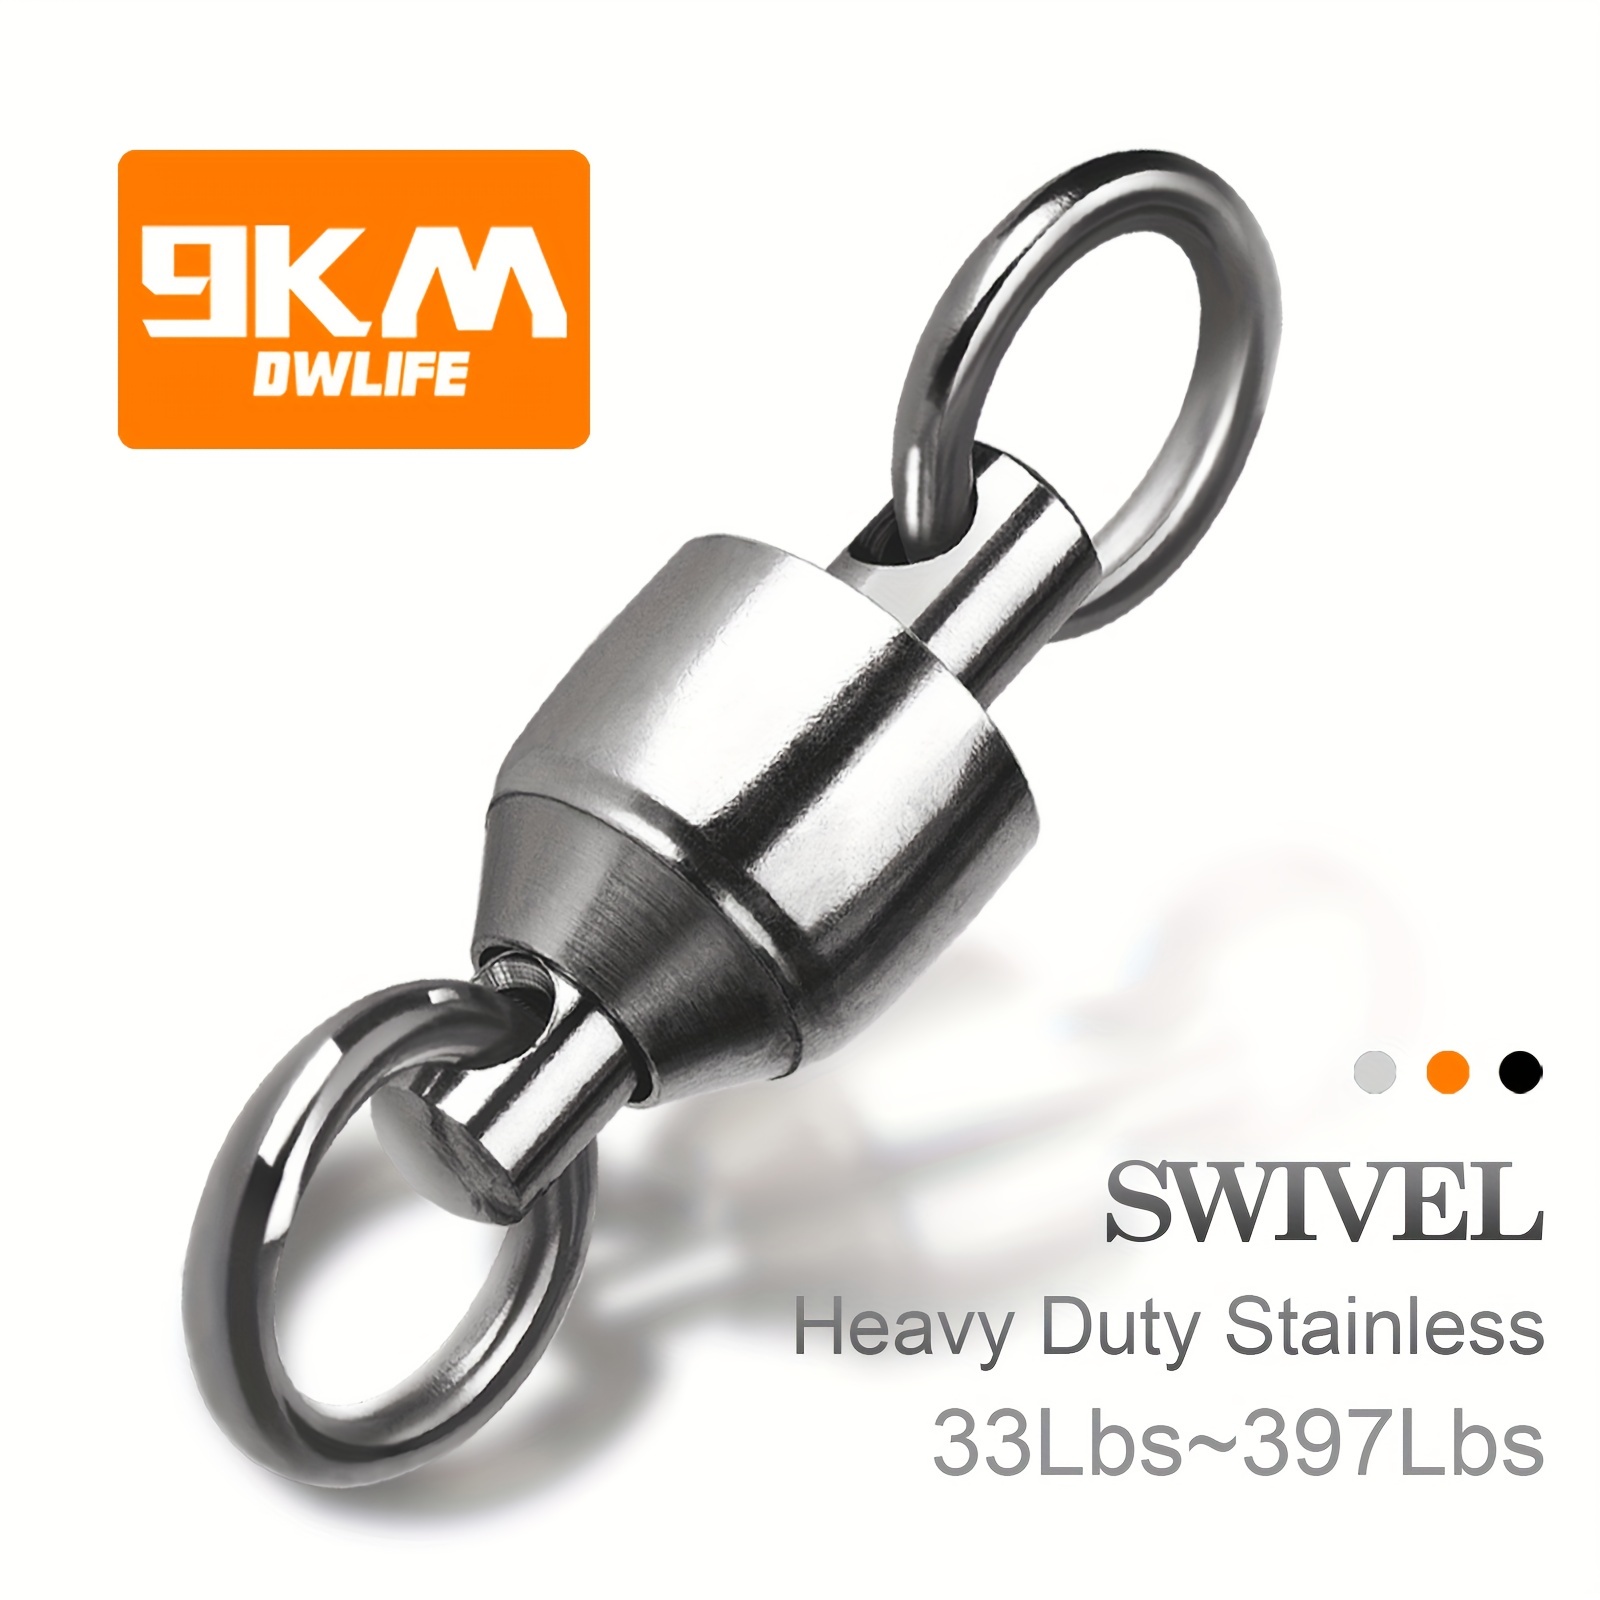 9KM DWLIFE Ball Bearing Swivels Copper Stainless Steel Solid Welded Ring Black Nickel High Strength Connector Saltwater Freshwater Fishing Tackle